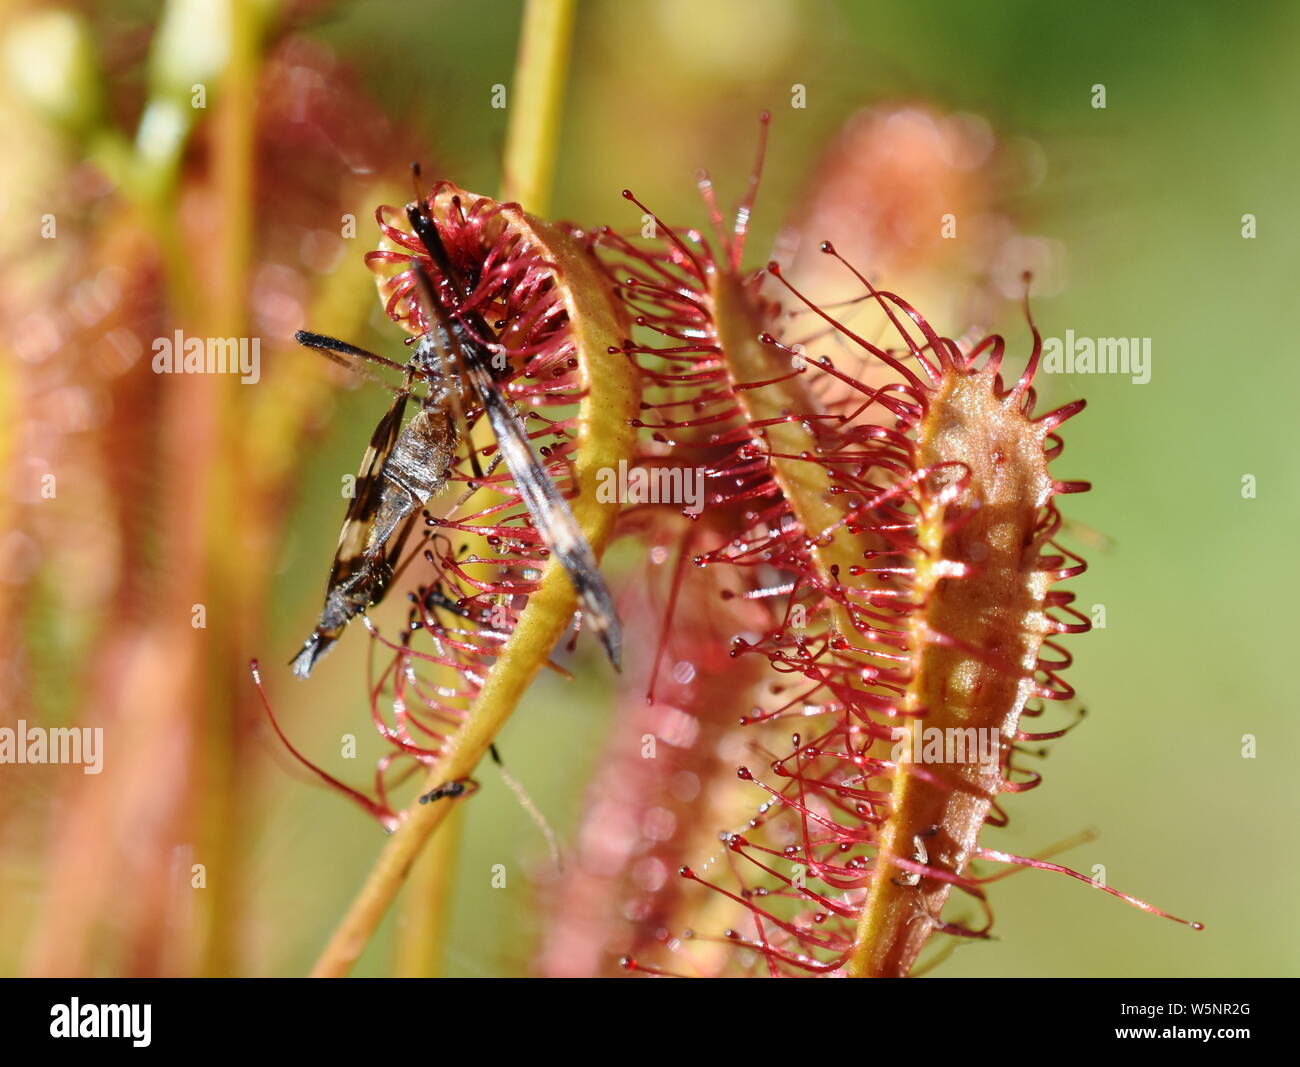 Insect stuck on the sticky leaves of a Drosera anglica great sundew plant Stock Photo